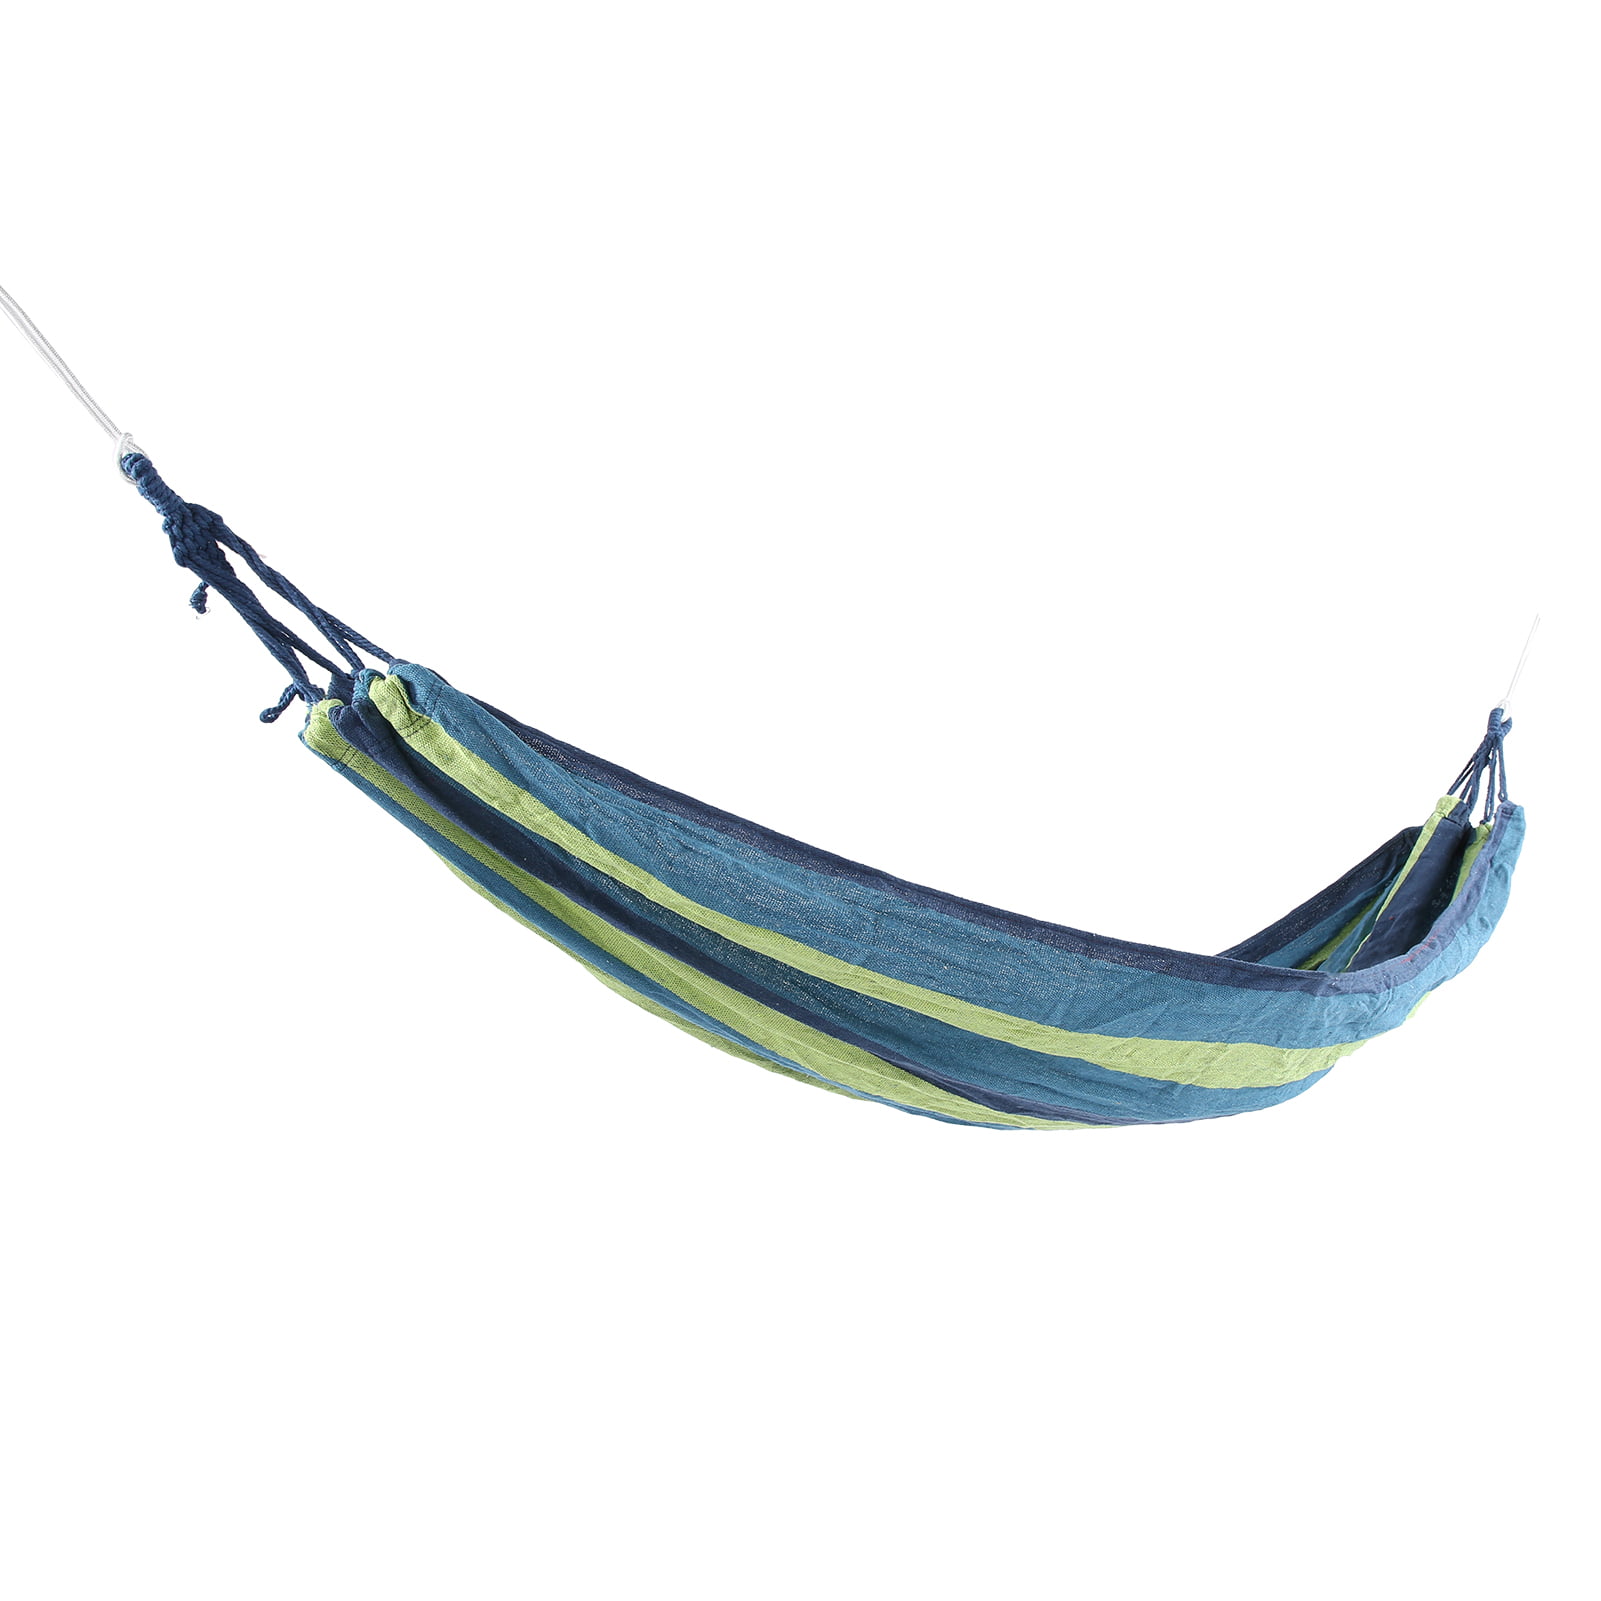 2 Person Double Camping Hammock Chair Bed Outdoor Hanging Swing Sleeping Gear 